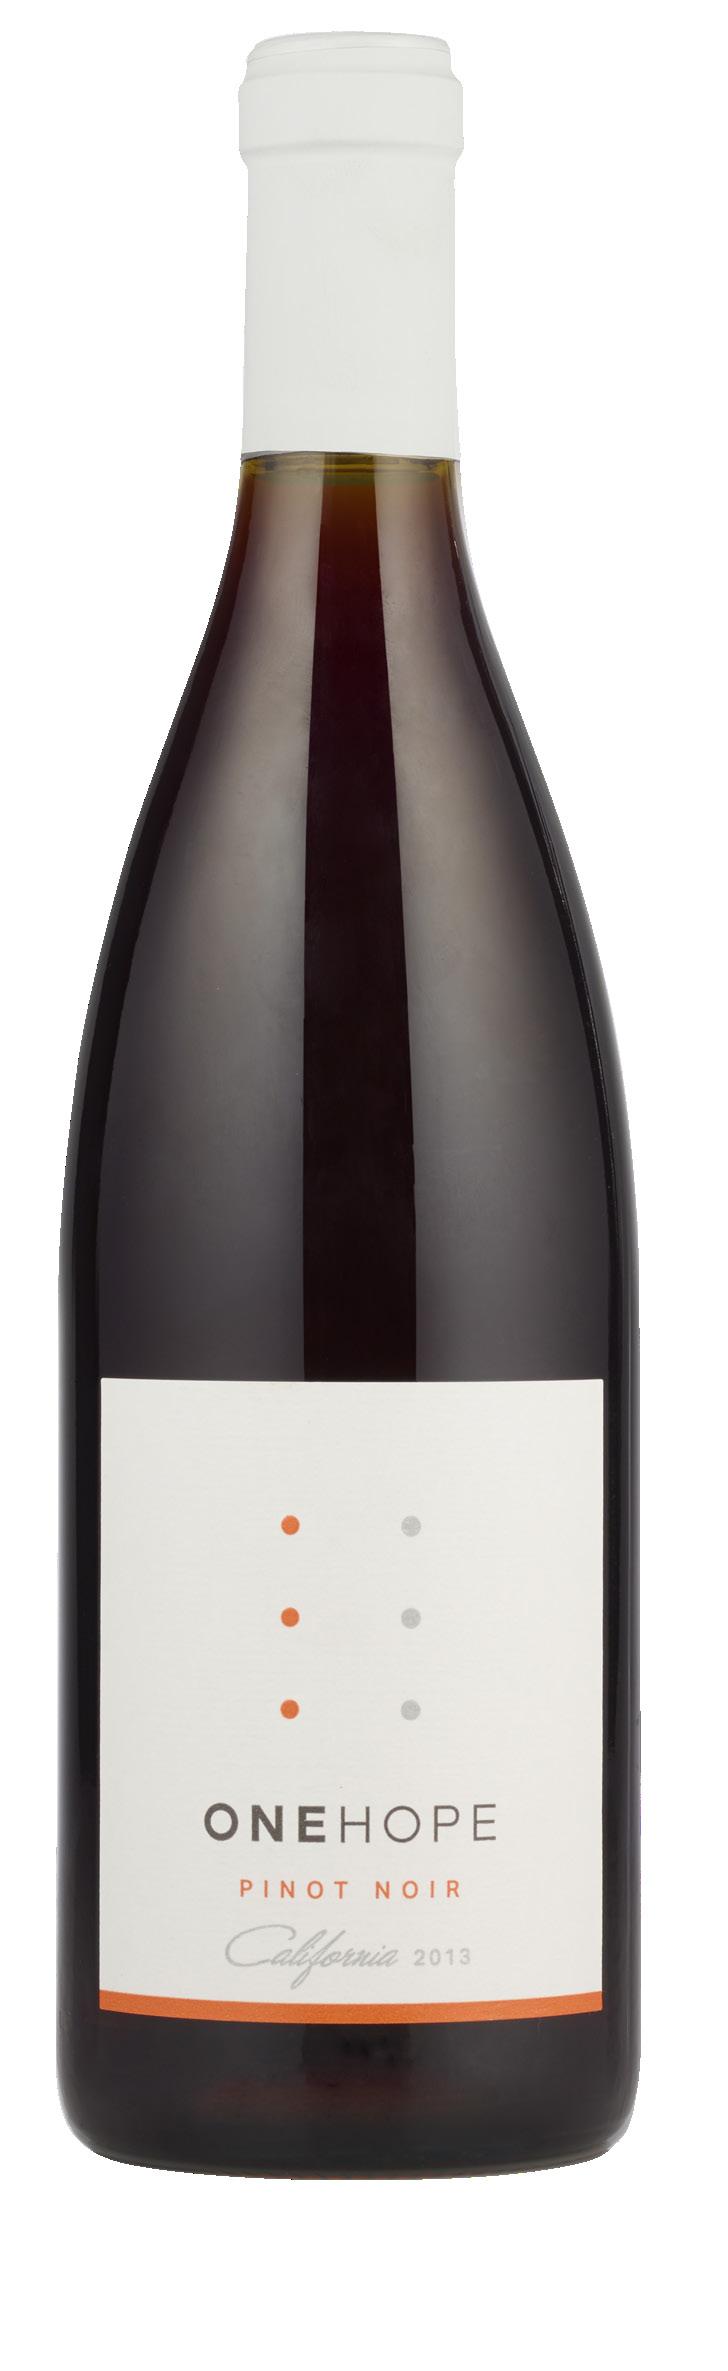 ONEHOPE CALIFORNIA PINOT NOIR silky strawberry cinnamon spice elegant versatile Bold juicy cherries and strawberries concentrate the core of this wine. Floral aromas lift the fruit.